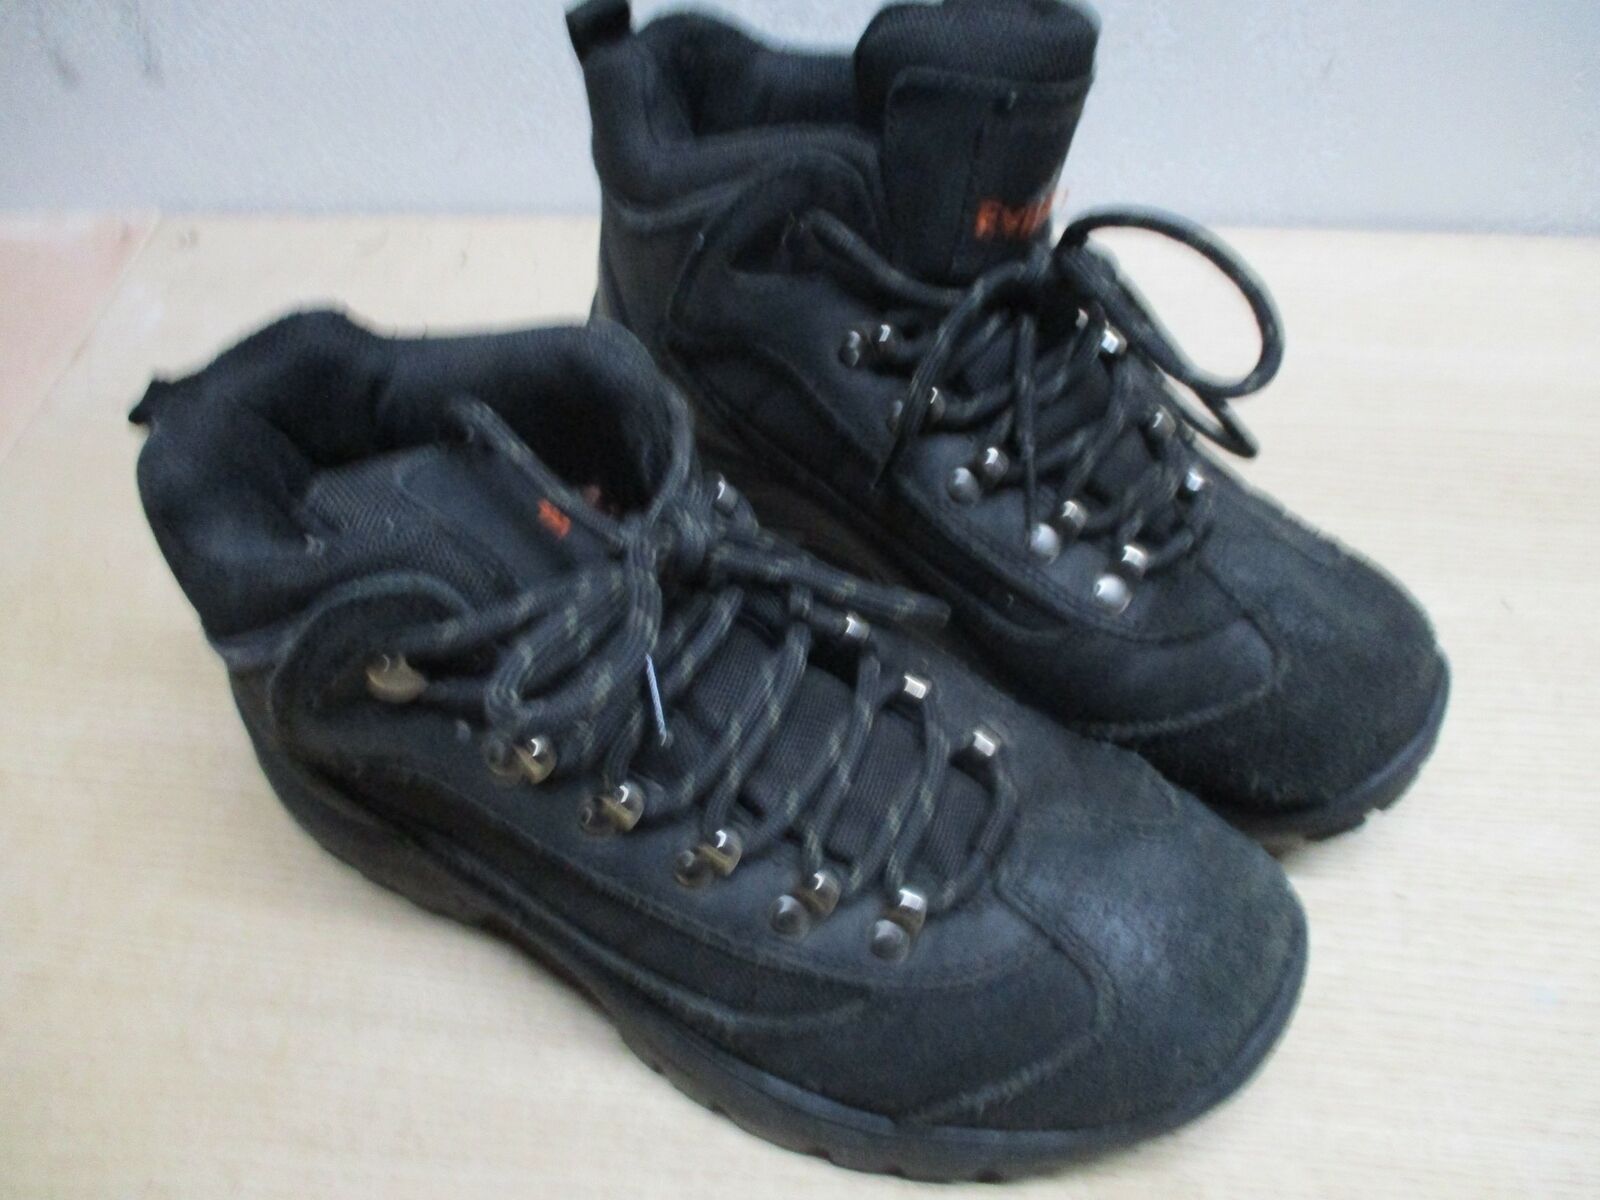 Everest Brand Men's 8.5 Hiking Boots - 0293-01681-1410 - Great Condition